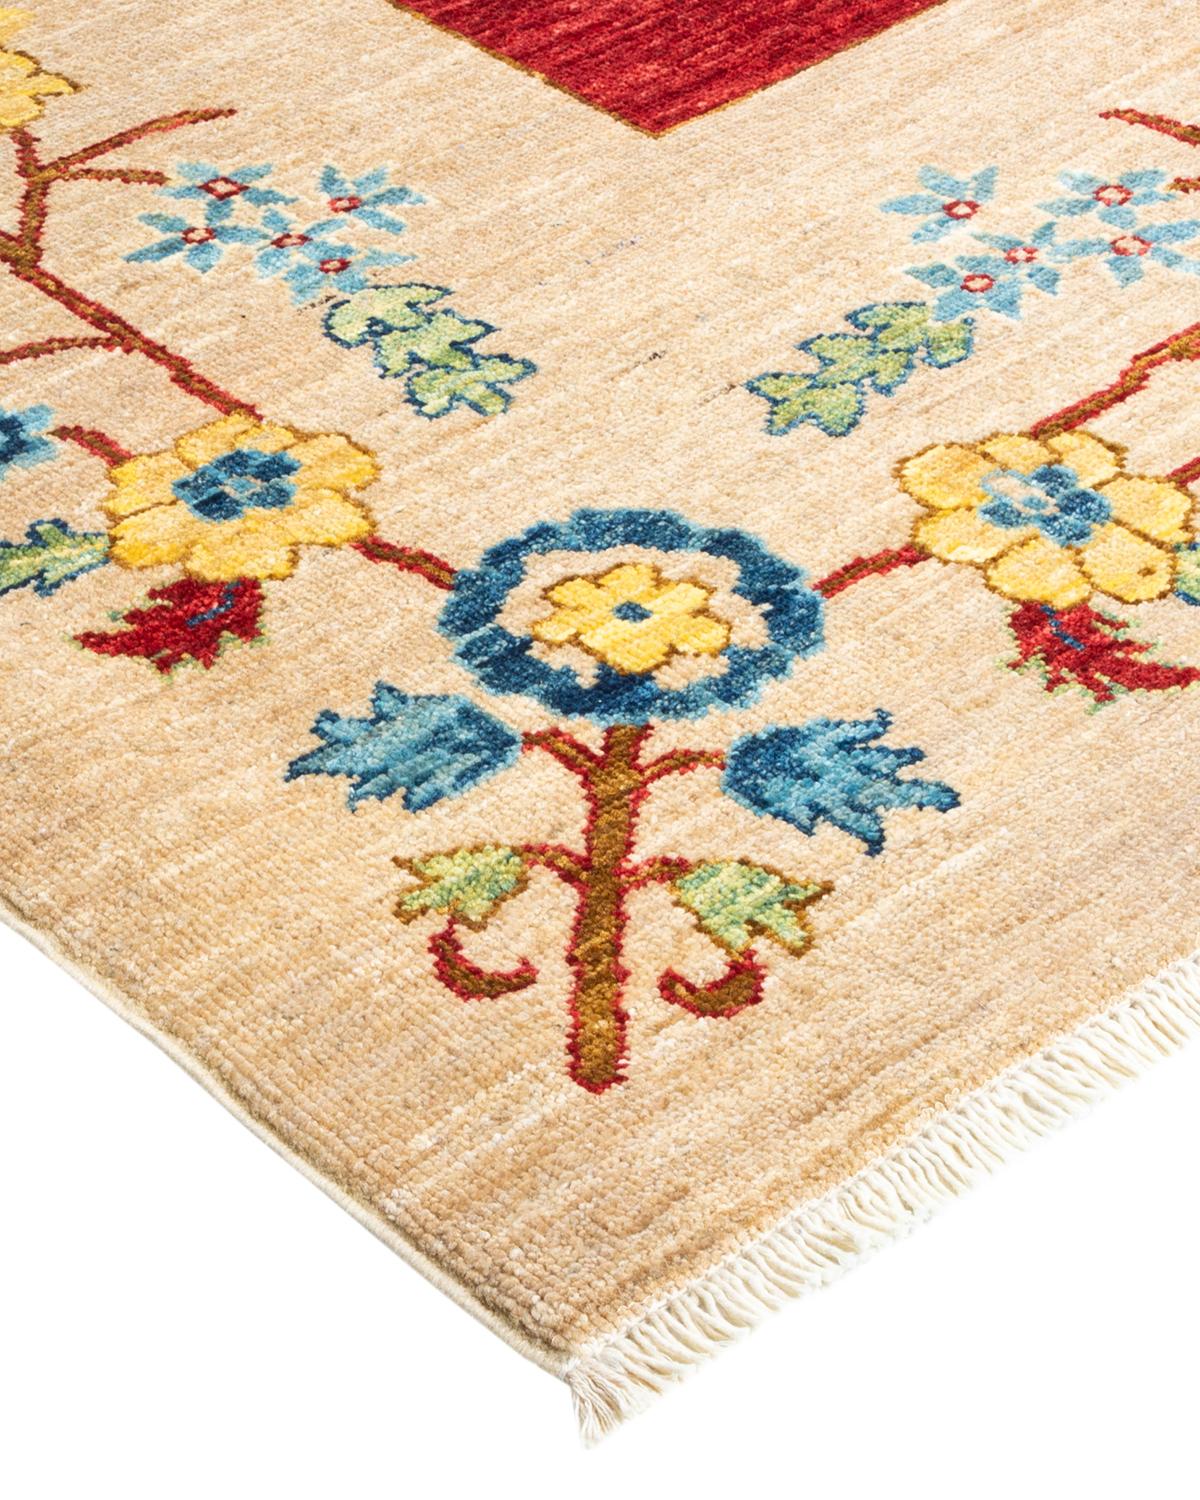 With an amalgam of sizes and aesthetic influences ranging from art deco to Rorschach and modernist, the rugs in the Eclectic collection defy definition, asking instead to become intriguing focal points of a room. They are at once statement pieces